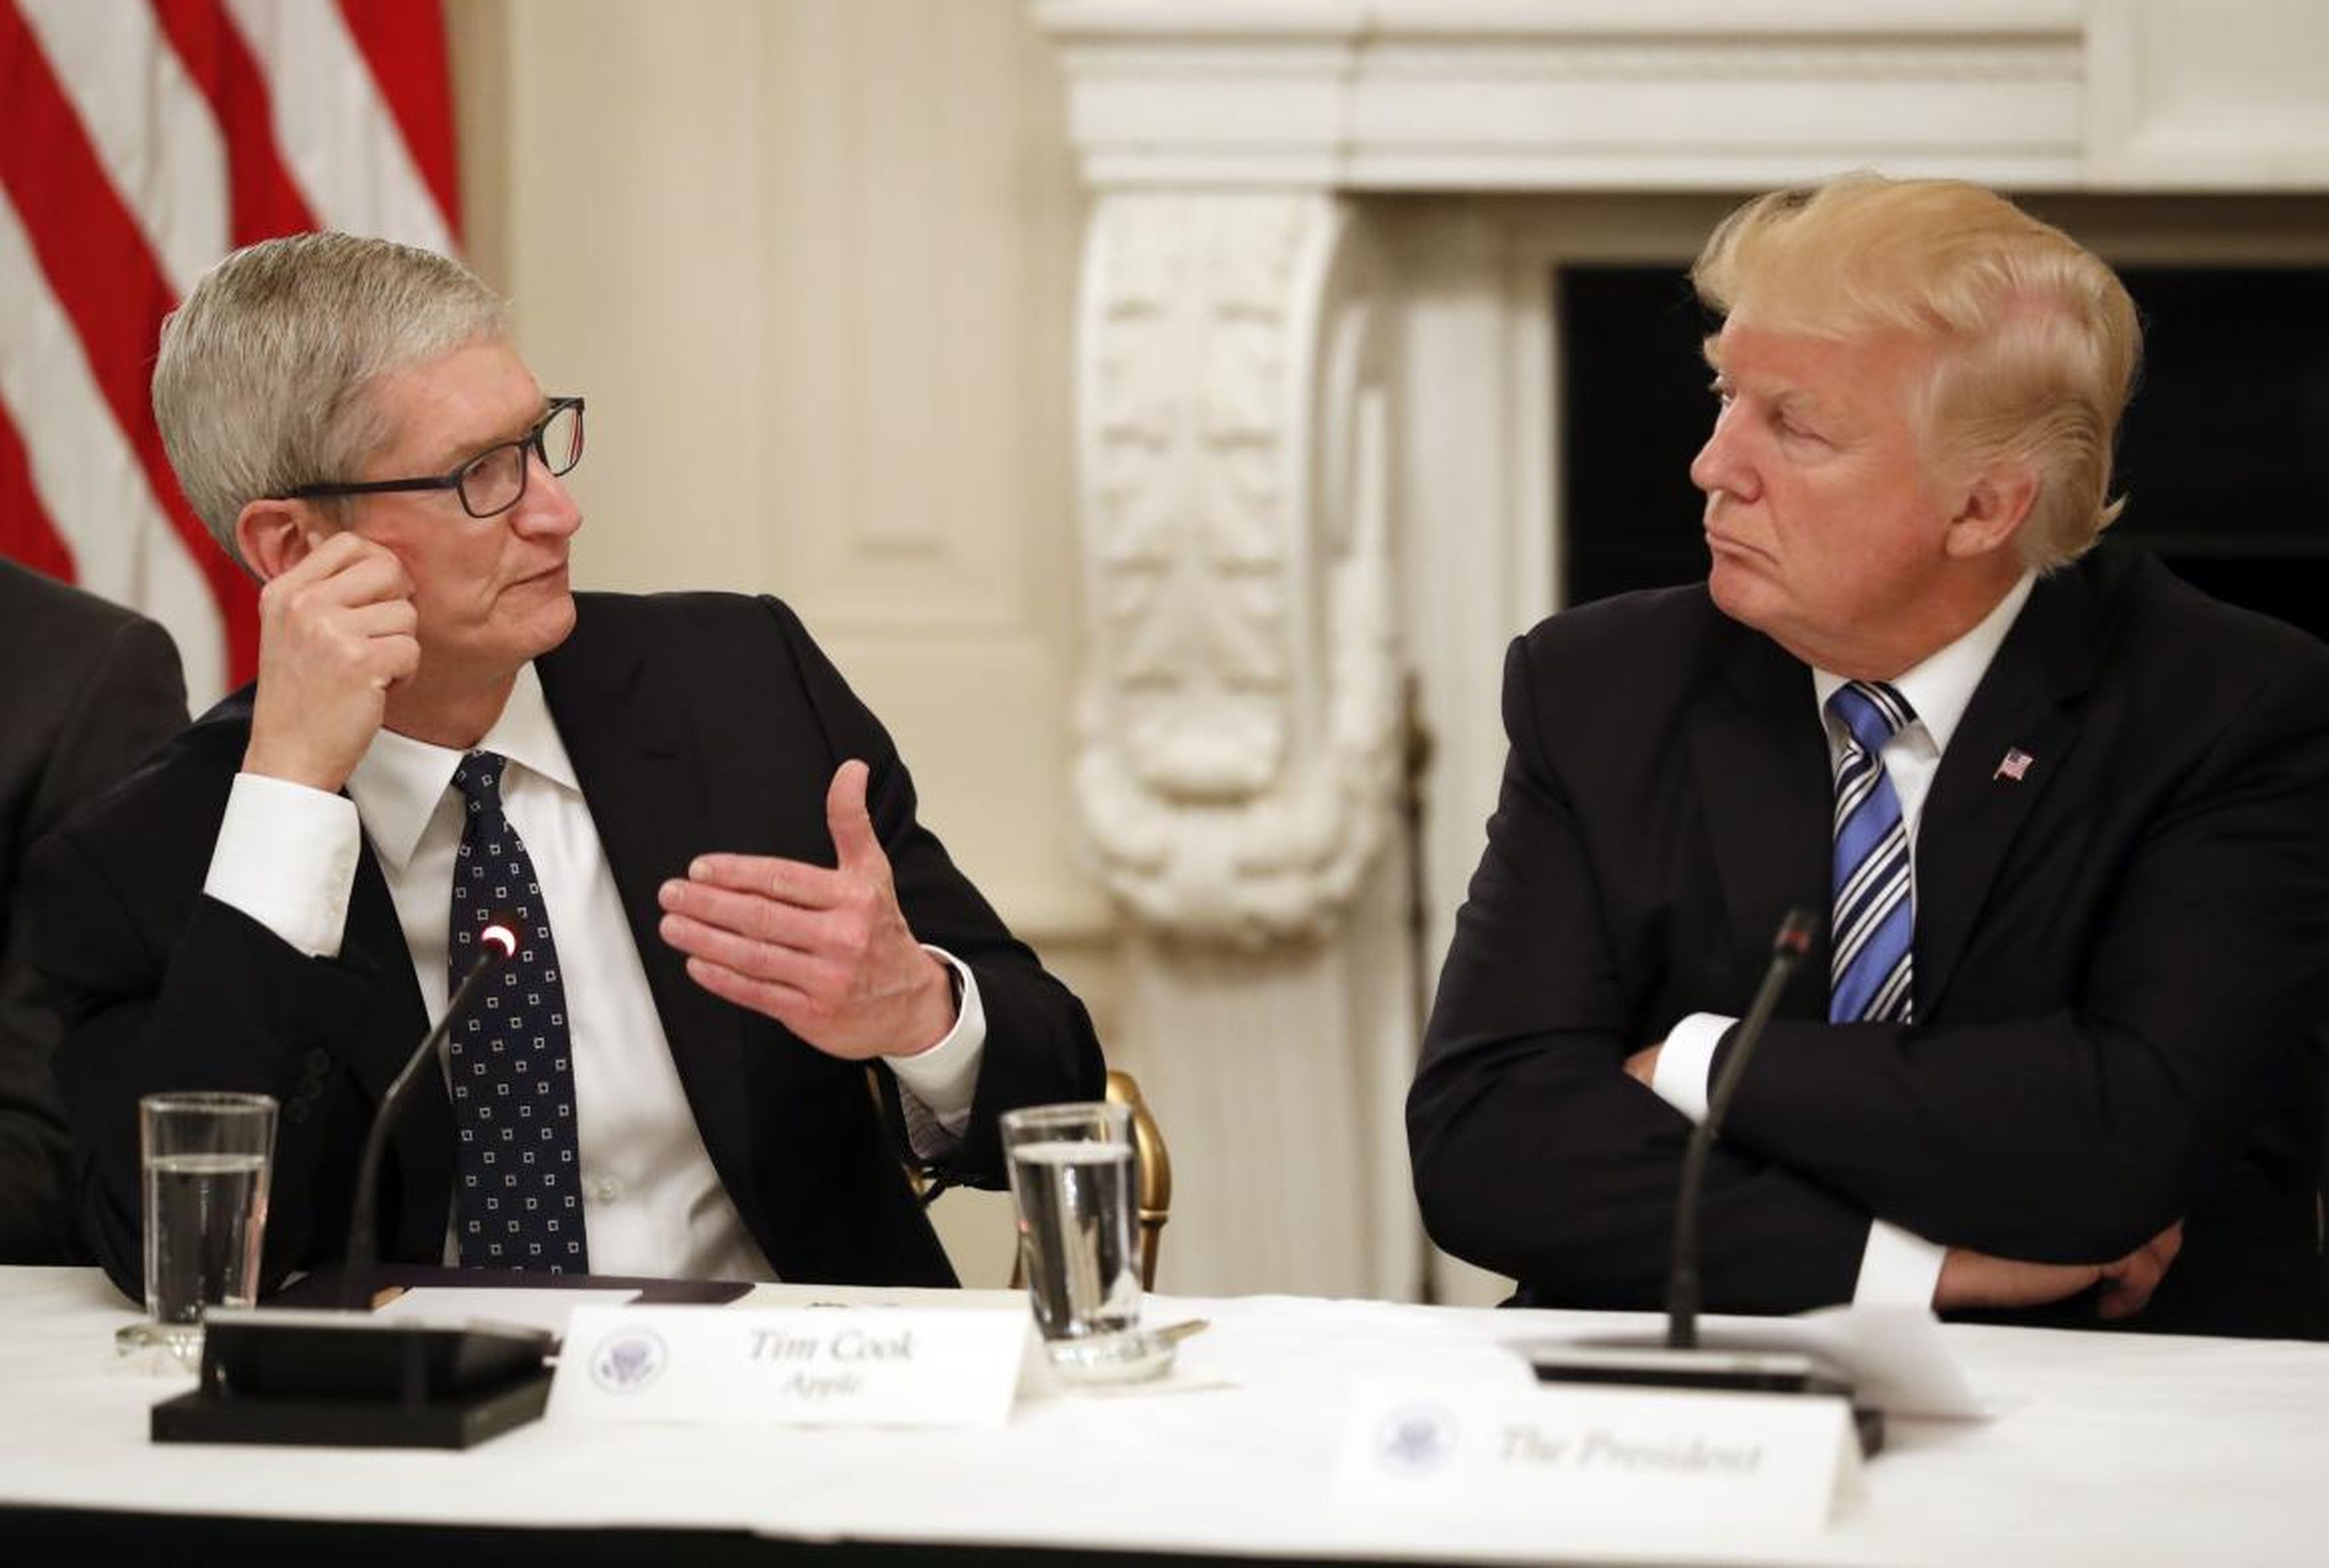 5. The iPhone could also be subject to new tariffs threatened by President Donald Trump. Because Apple does a lot of manufacturing in Asia and China specifically, tariffs could raise the price of Apple products, potentially